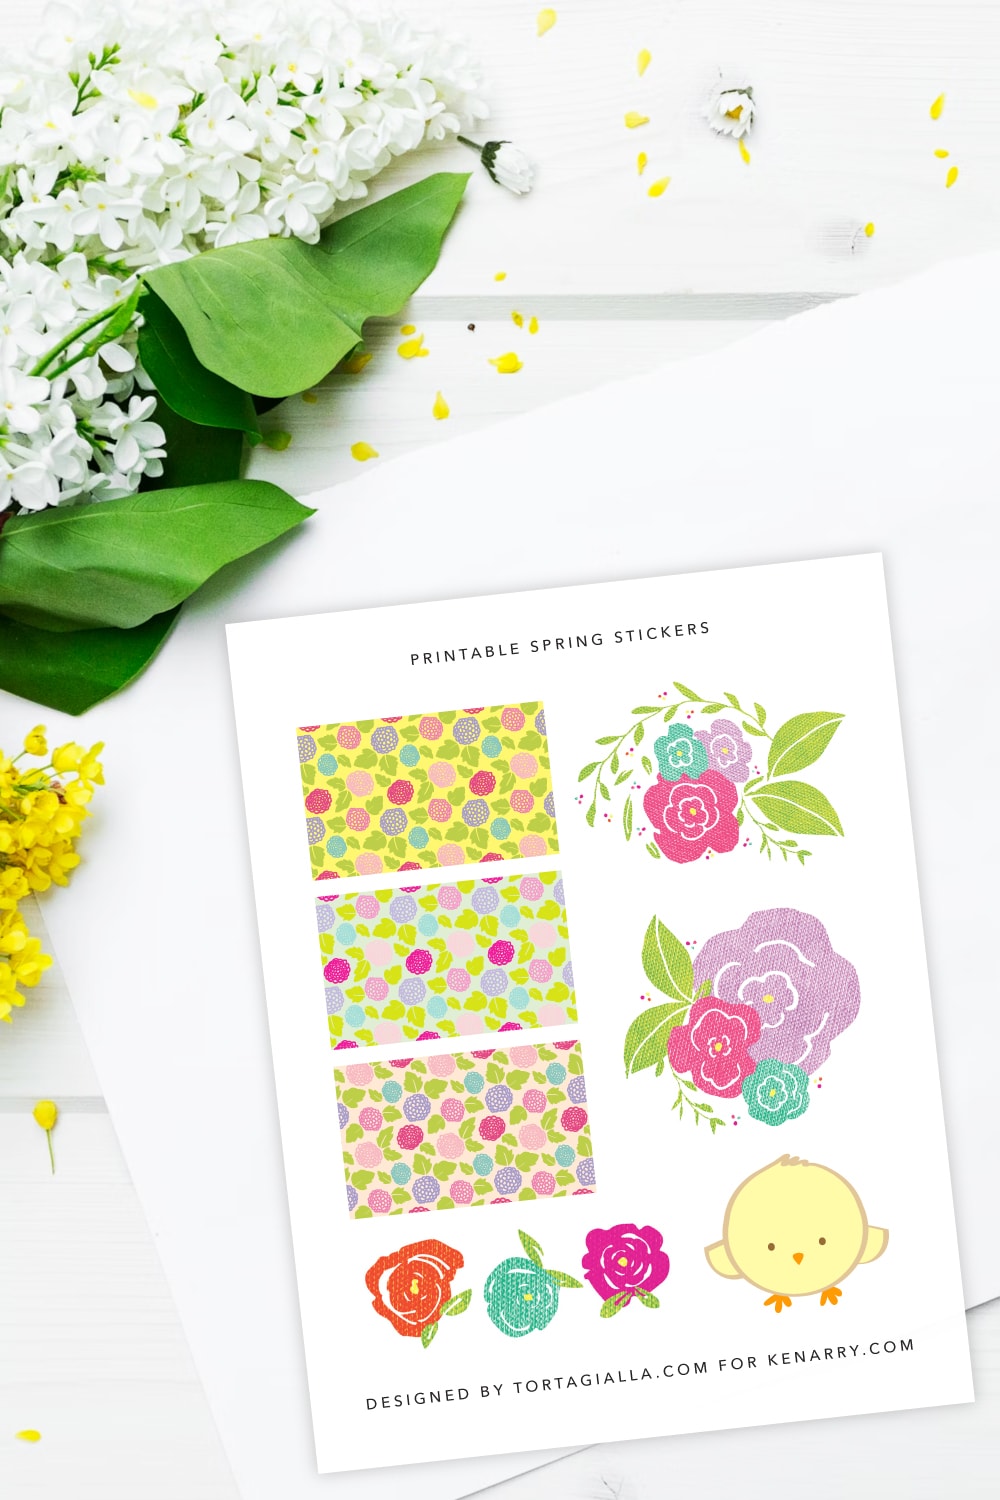 Preview of spring stickers printable page on top of a white desk with yellow and white flowers and green leaves in the upper left corner. 